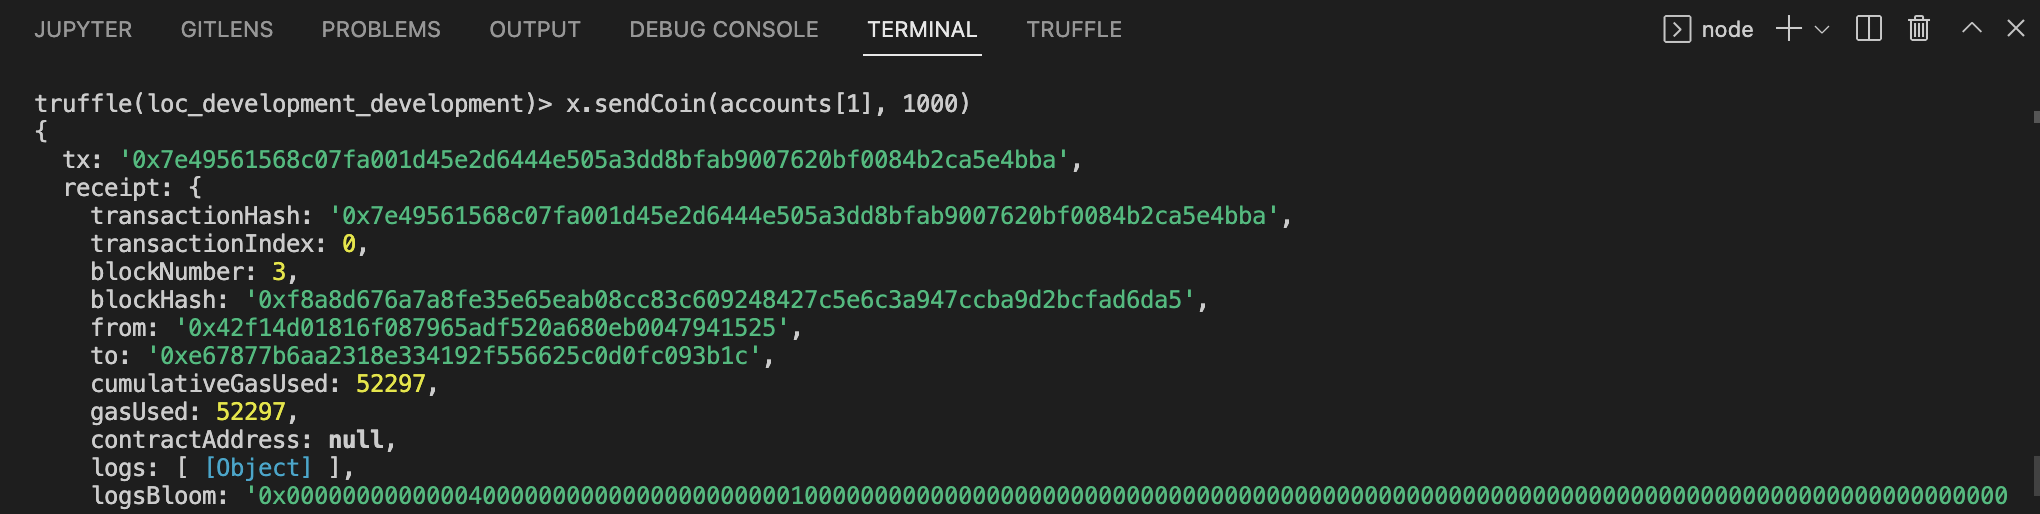 Execute function in Truffle console